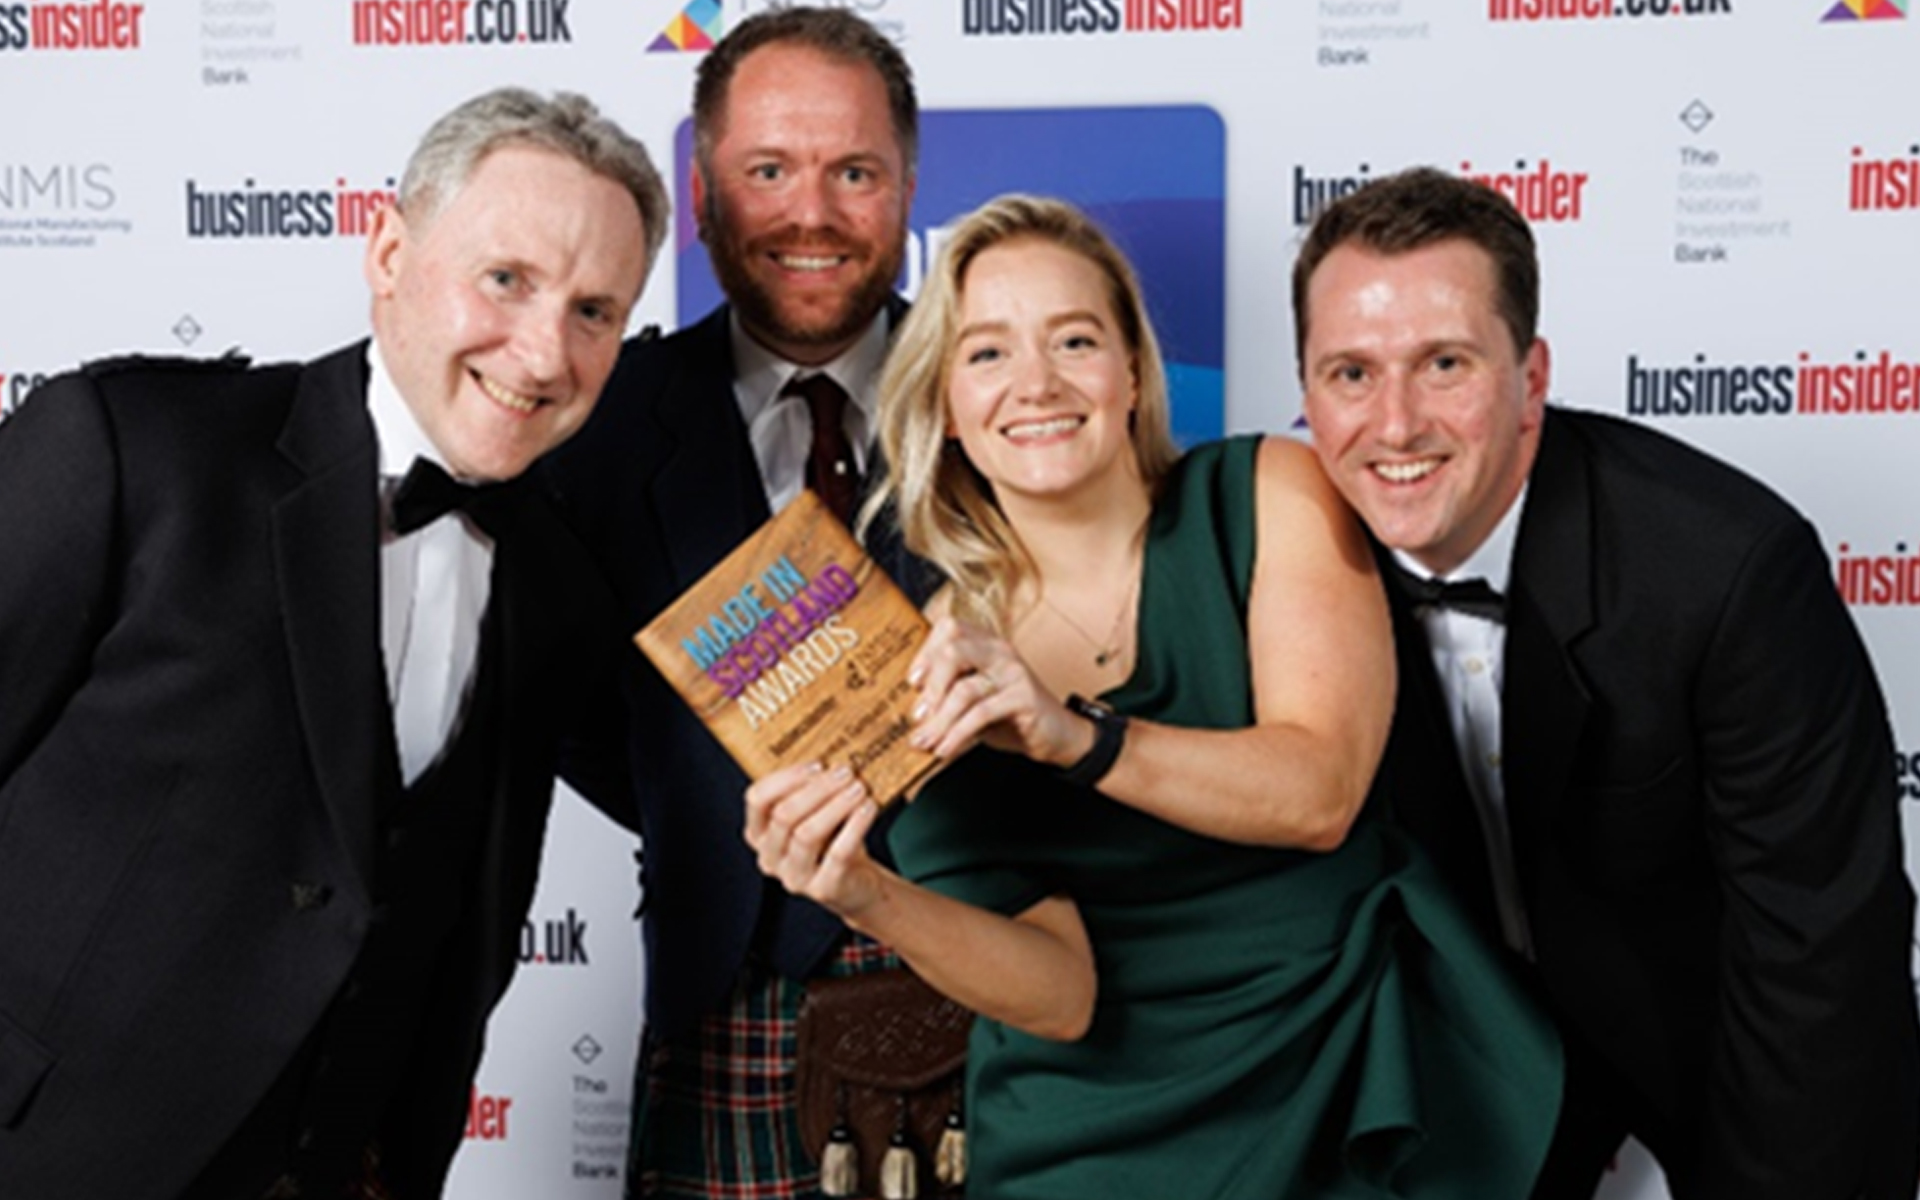 Dxcover win Life Sciences Company of the Year Award